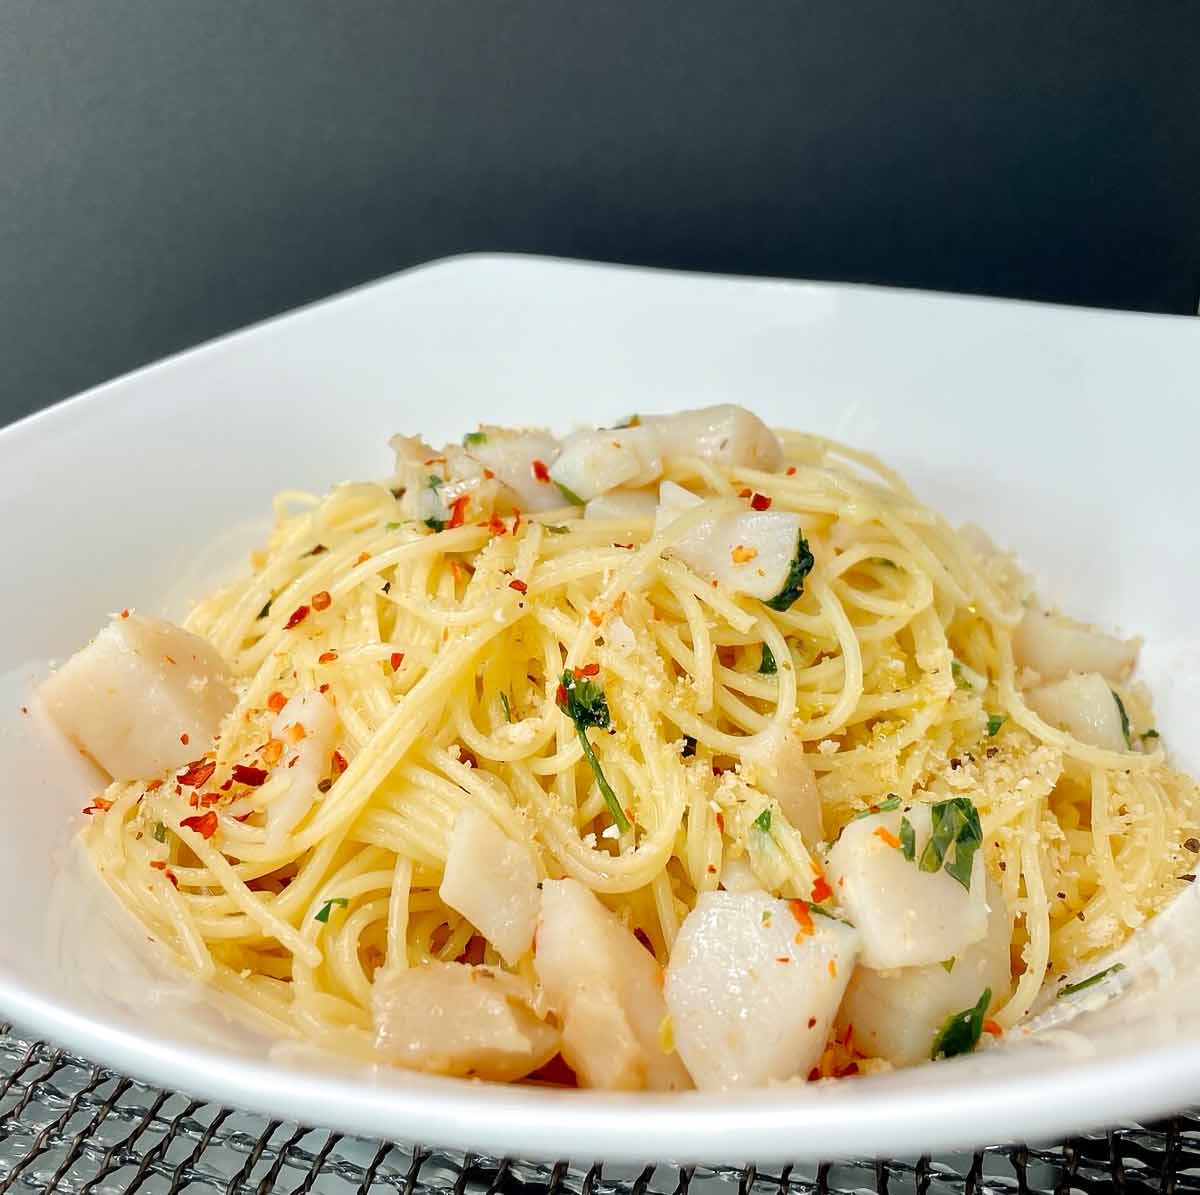 A bowl of spaghetti with scallops, topped with pepper flakes and parsley.